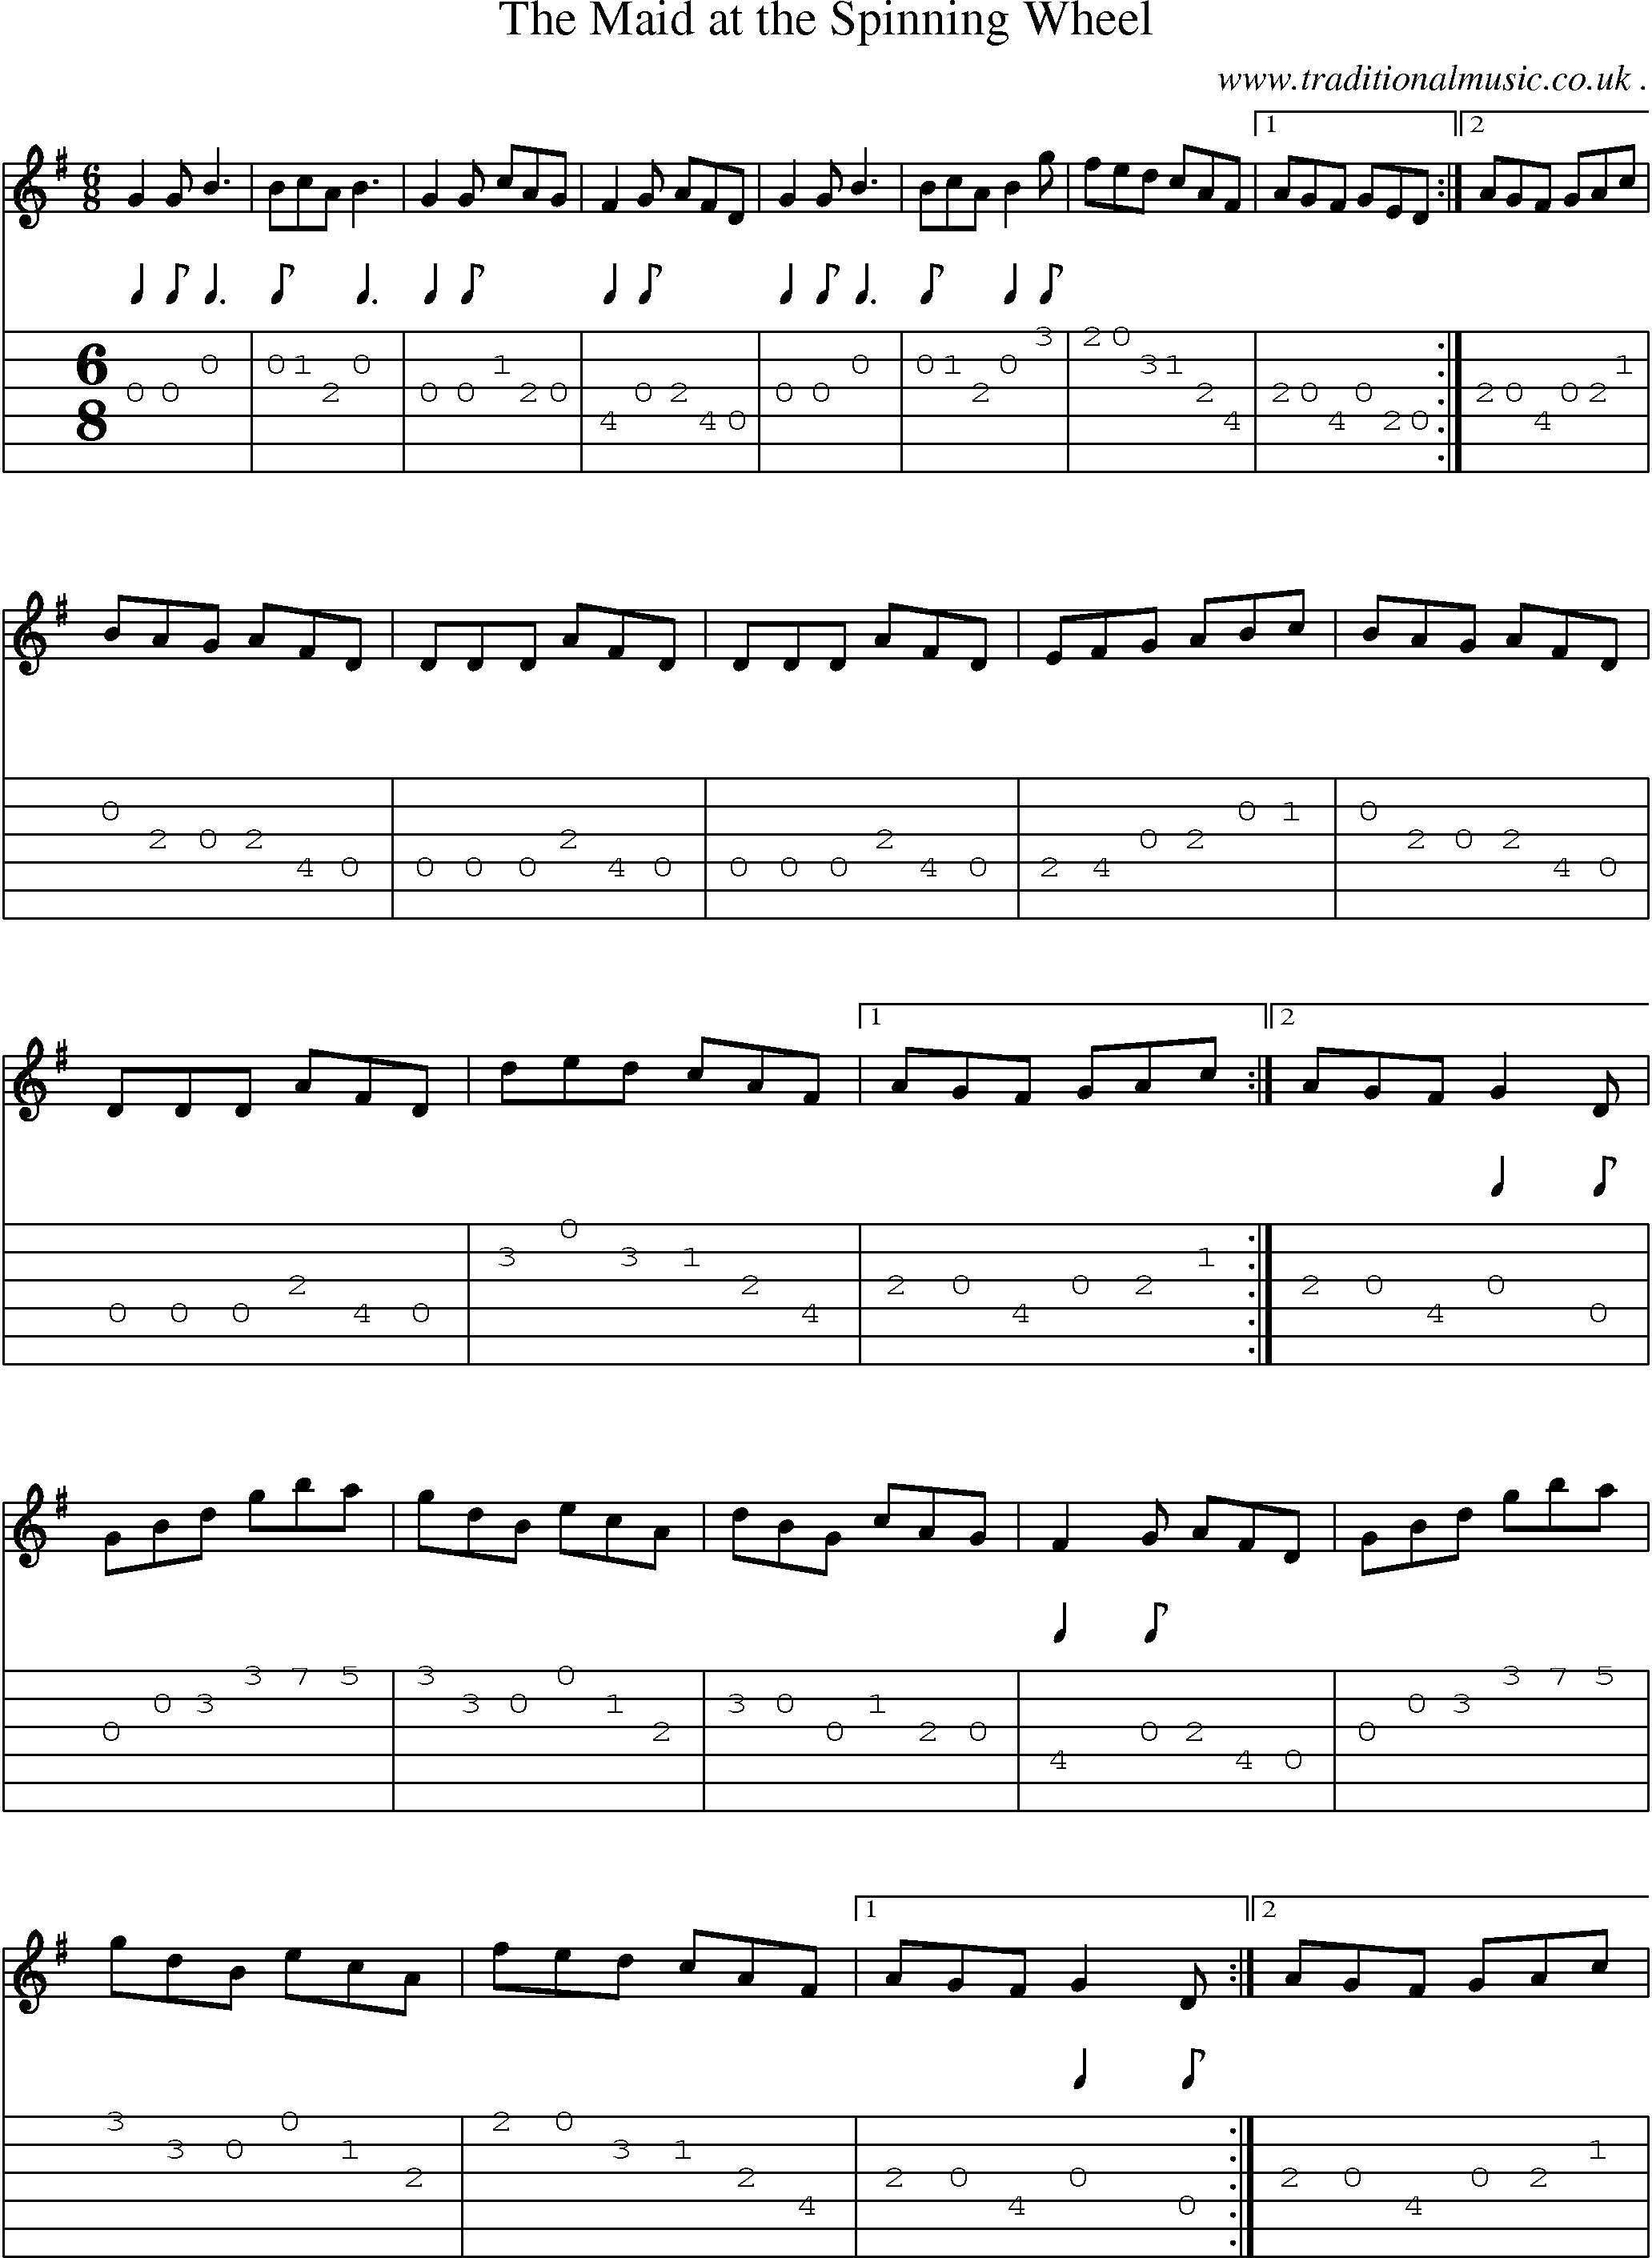 Sheet-Music and Guitar Tabs for The Maid At The Spinning Wheel